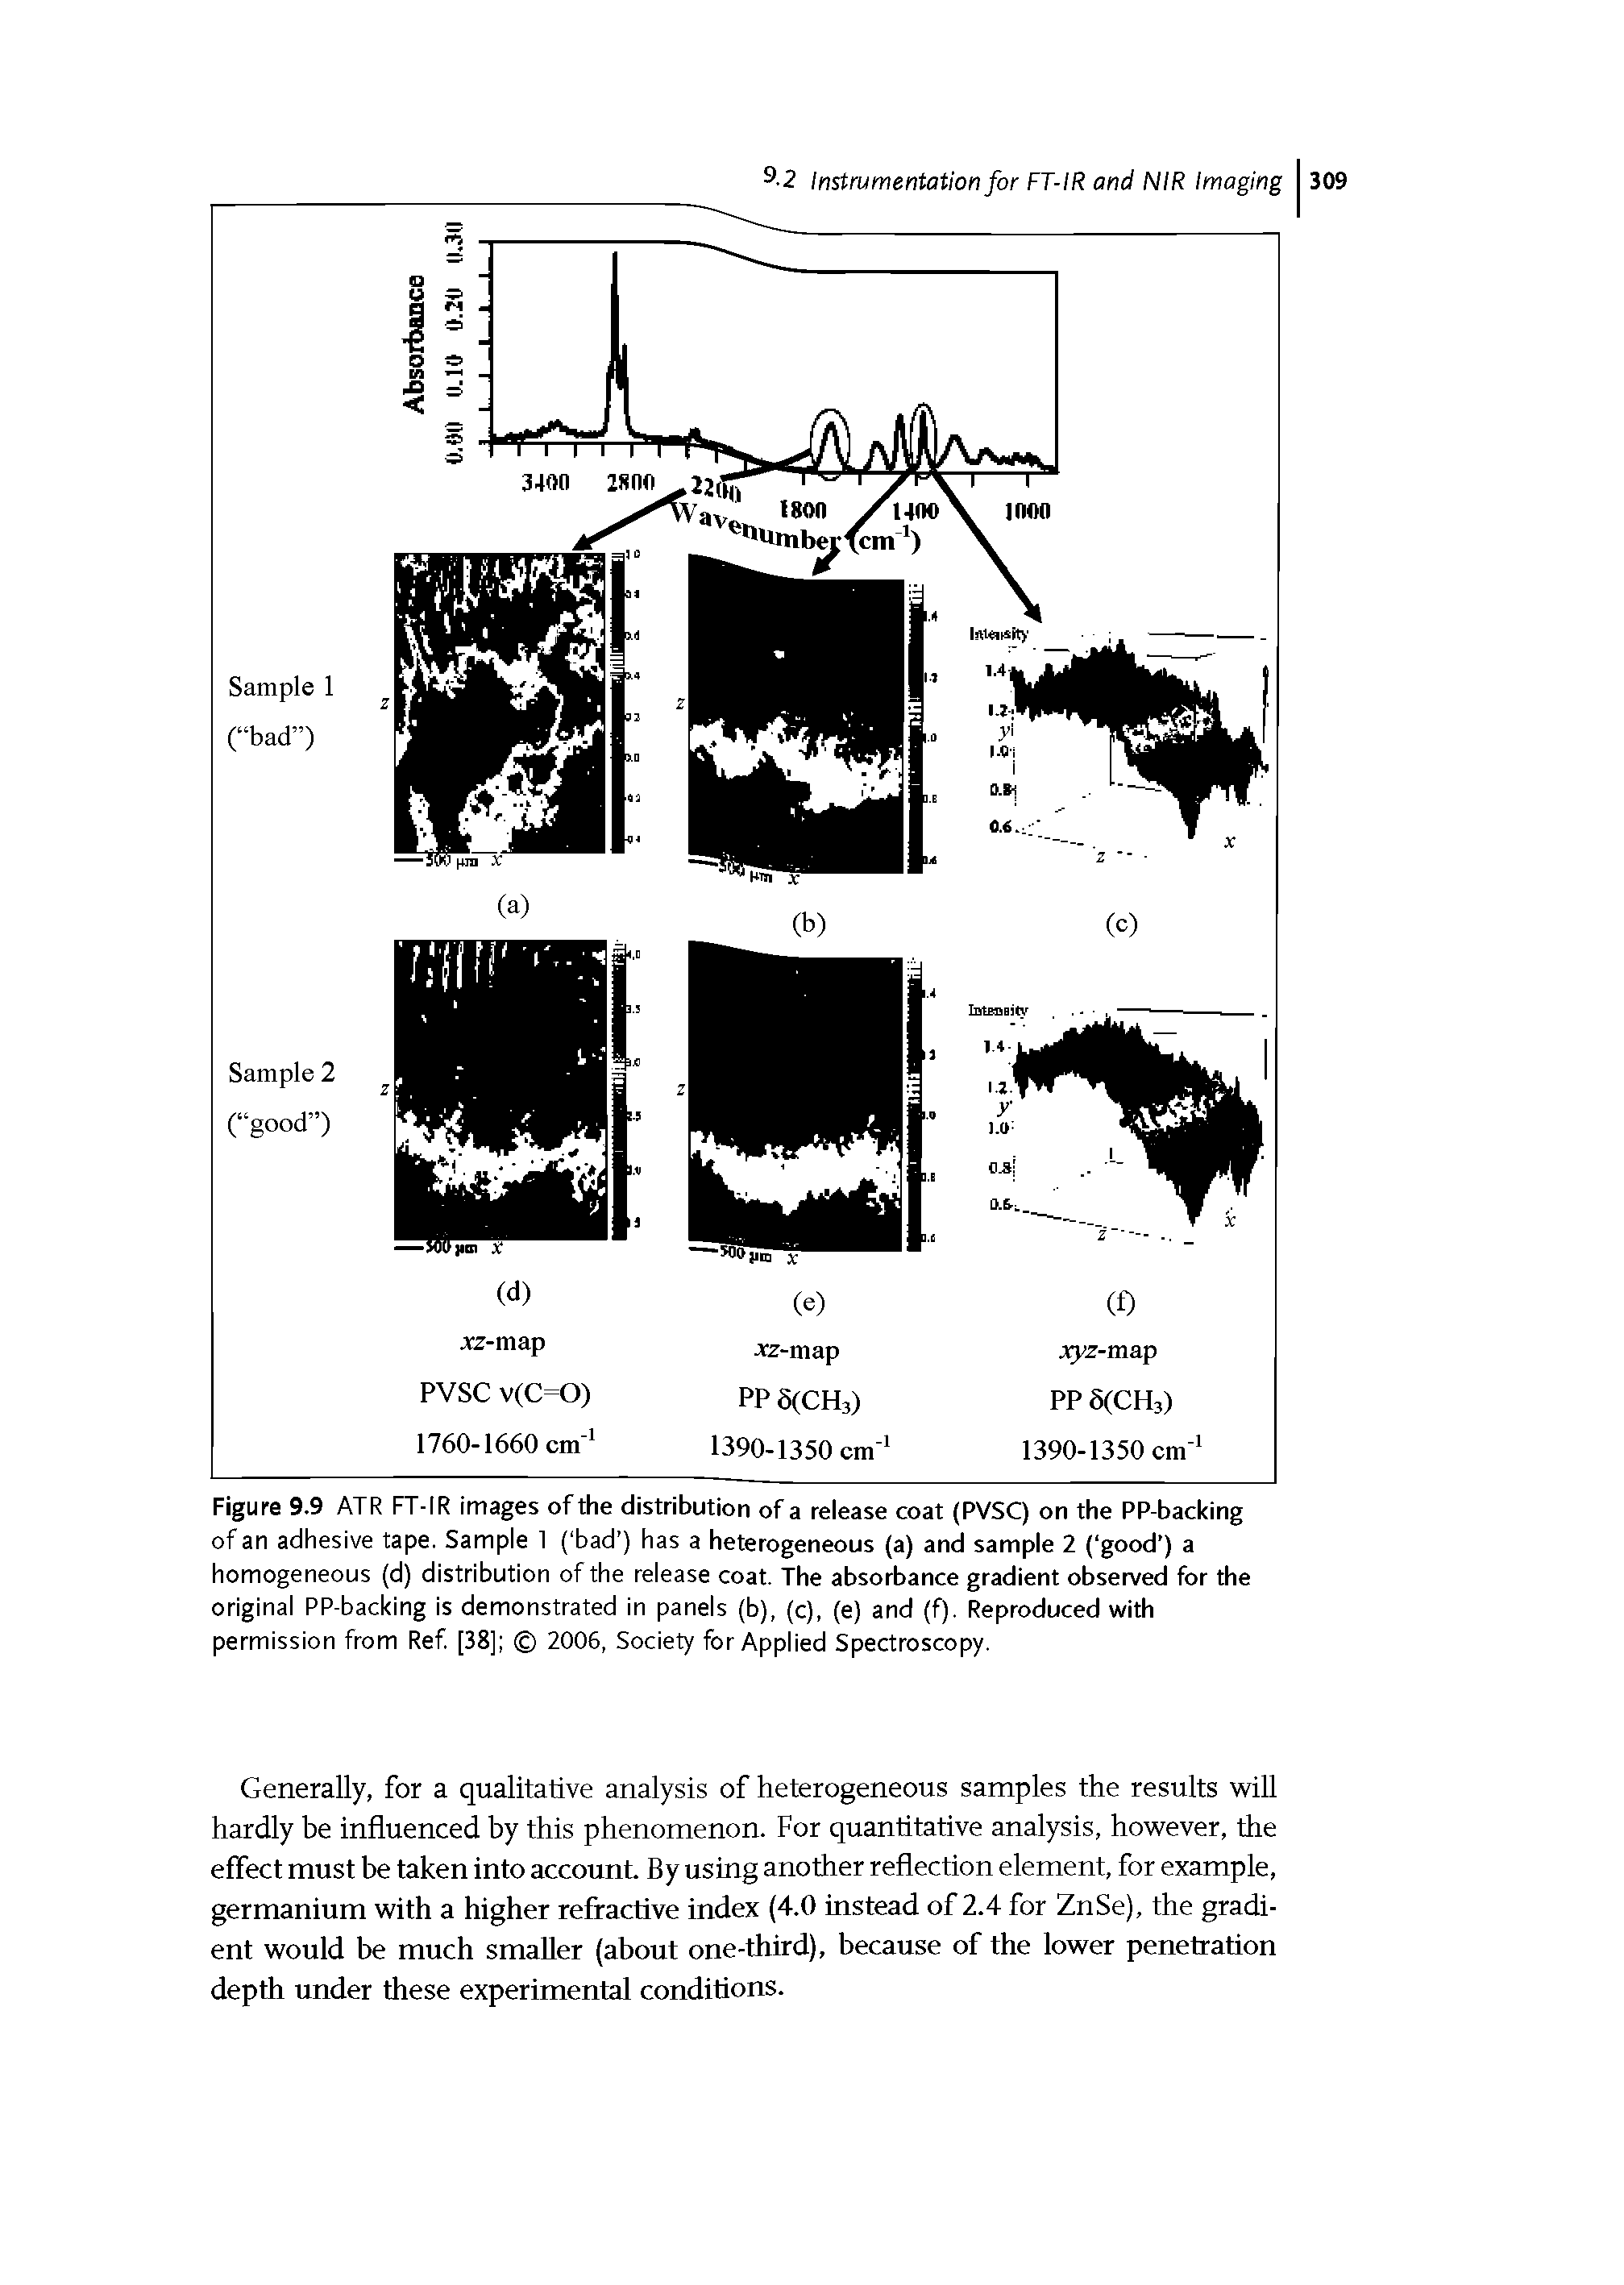 Figure 9.9 ATR FT-IR images of the distribution of a release coat (PVSC) on the PP-backing of an adhesive tape. Sample 1 ( bad ) has a heterogeneous (a) and sample 2 ( good ) a homogeneous (d) distribution of the release coat. The absorbance gradient observed for the original PP-backing is demonstrated in panels (b), (c), (e) and (f). Reproduced with permission from Ref [38] 2006, Society for Applied Spectroscopy.